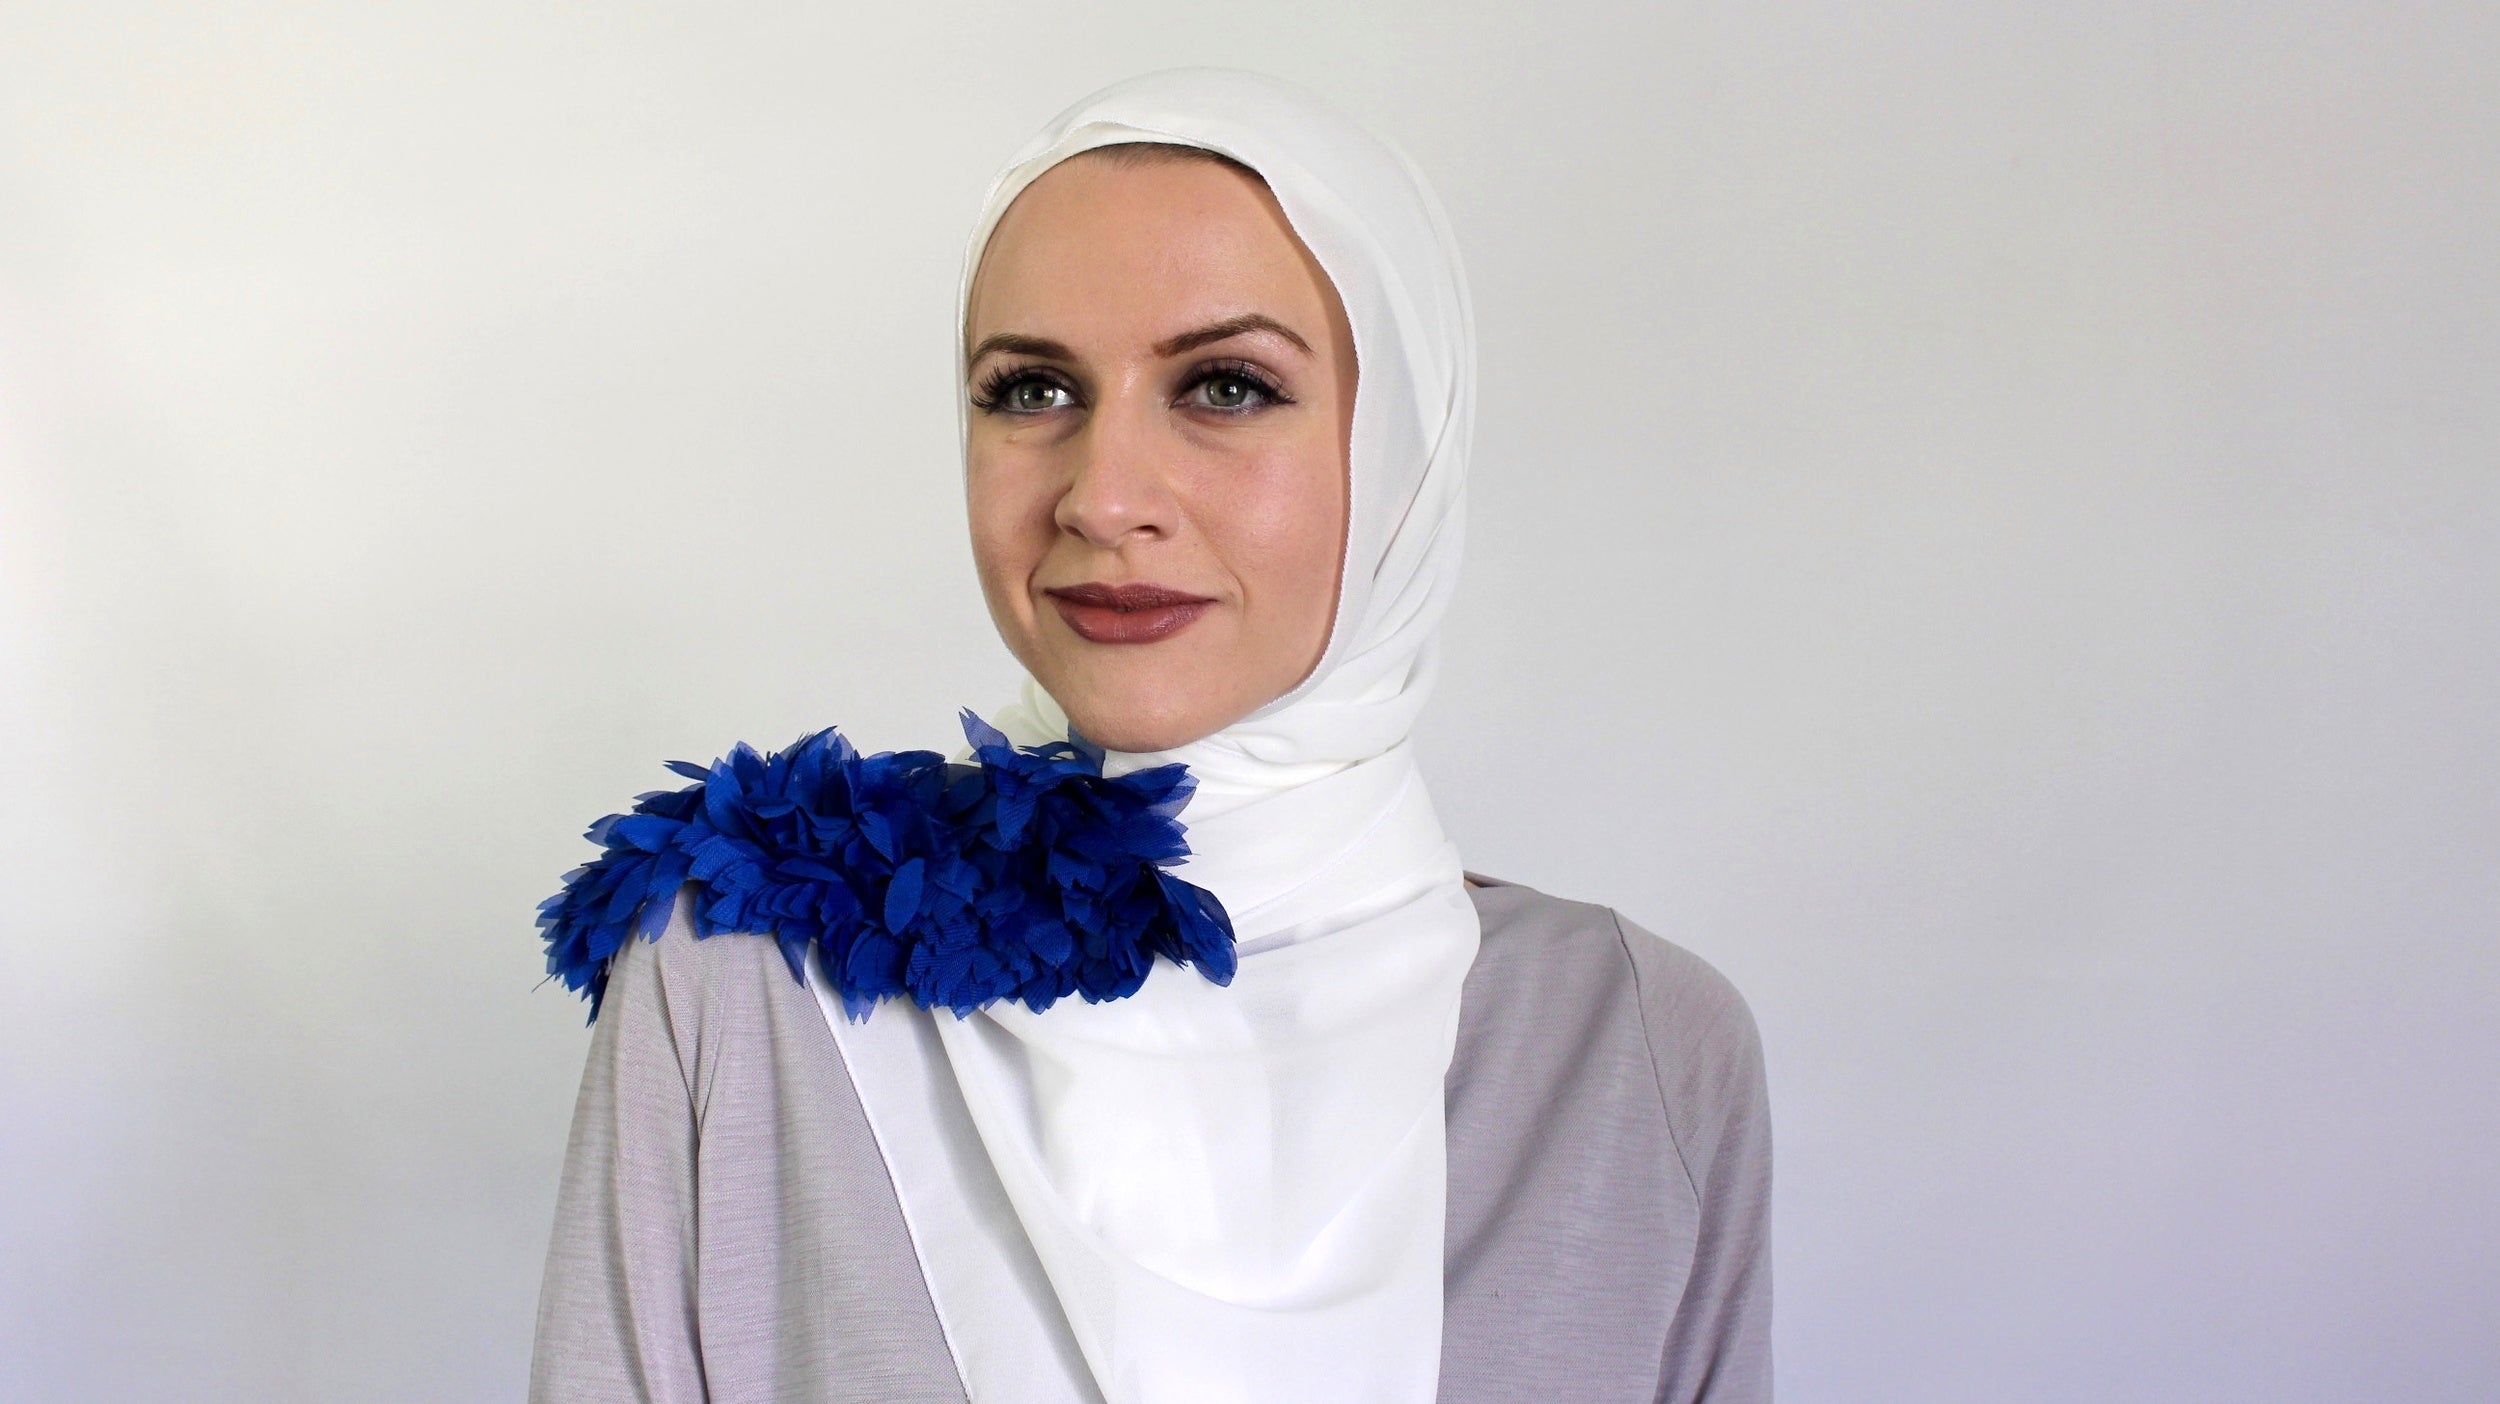 Introducing the PFH + Veilure Couture Hijab Collaboration!